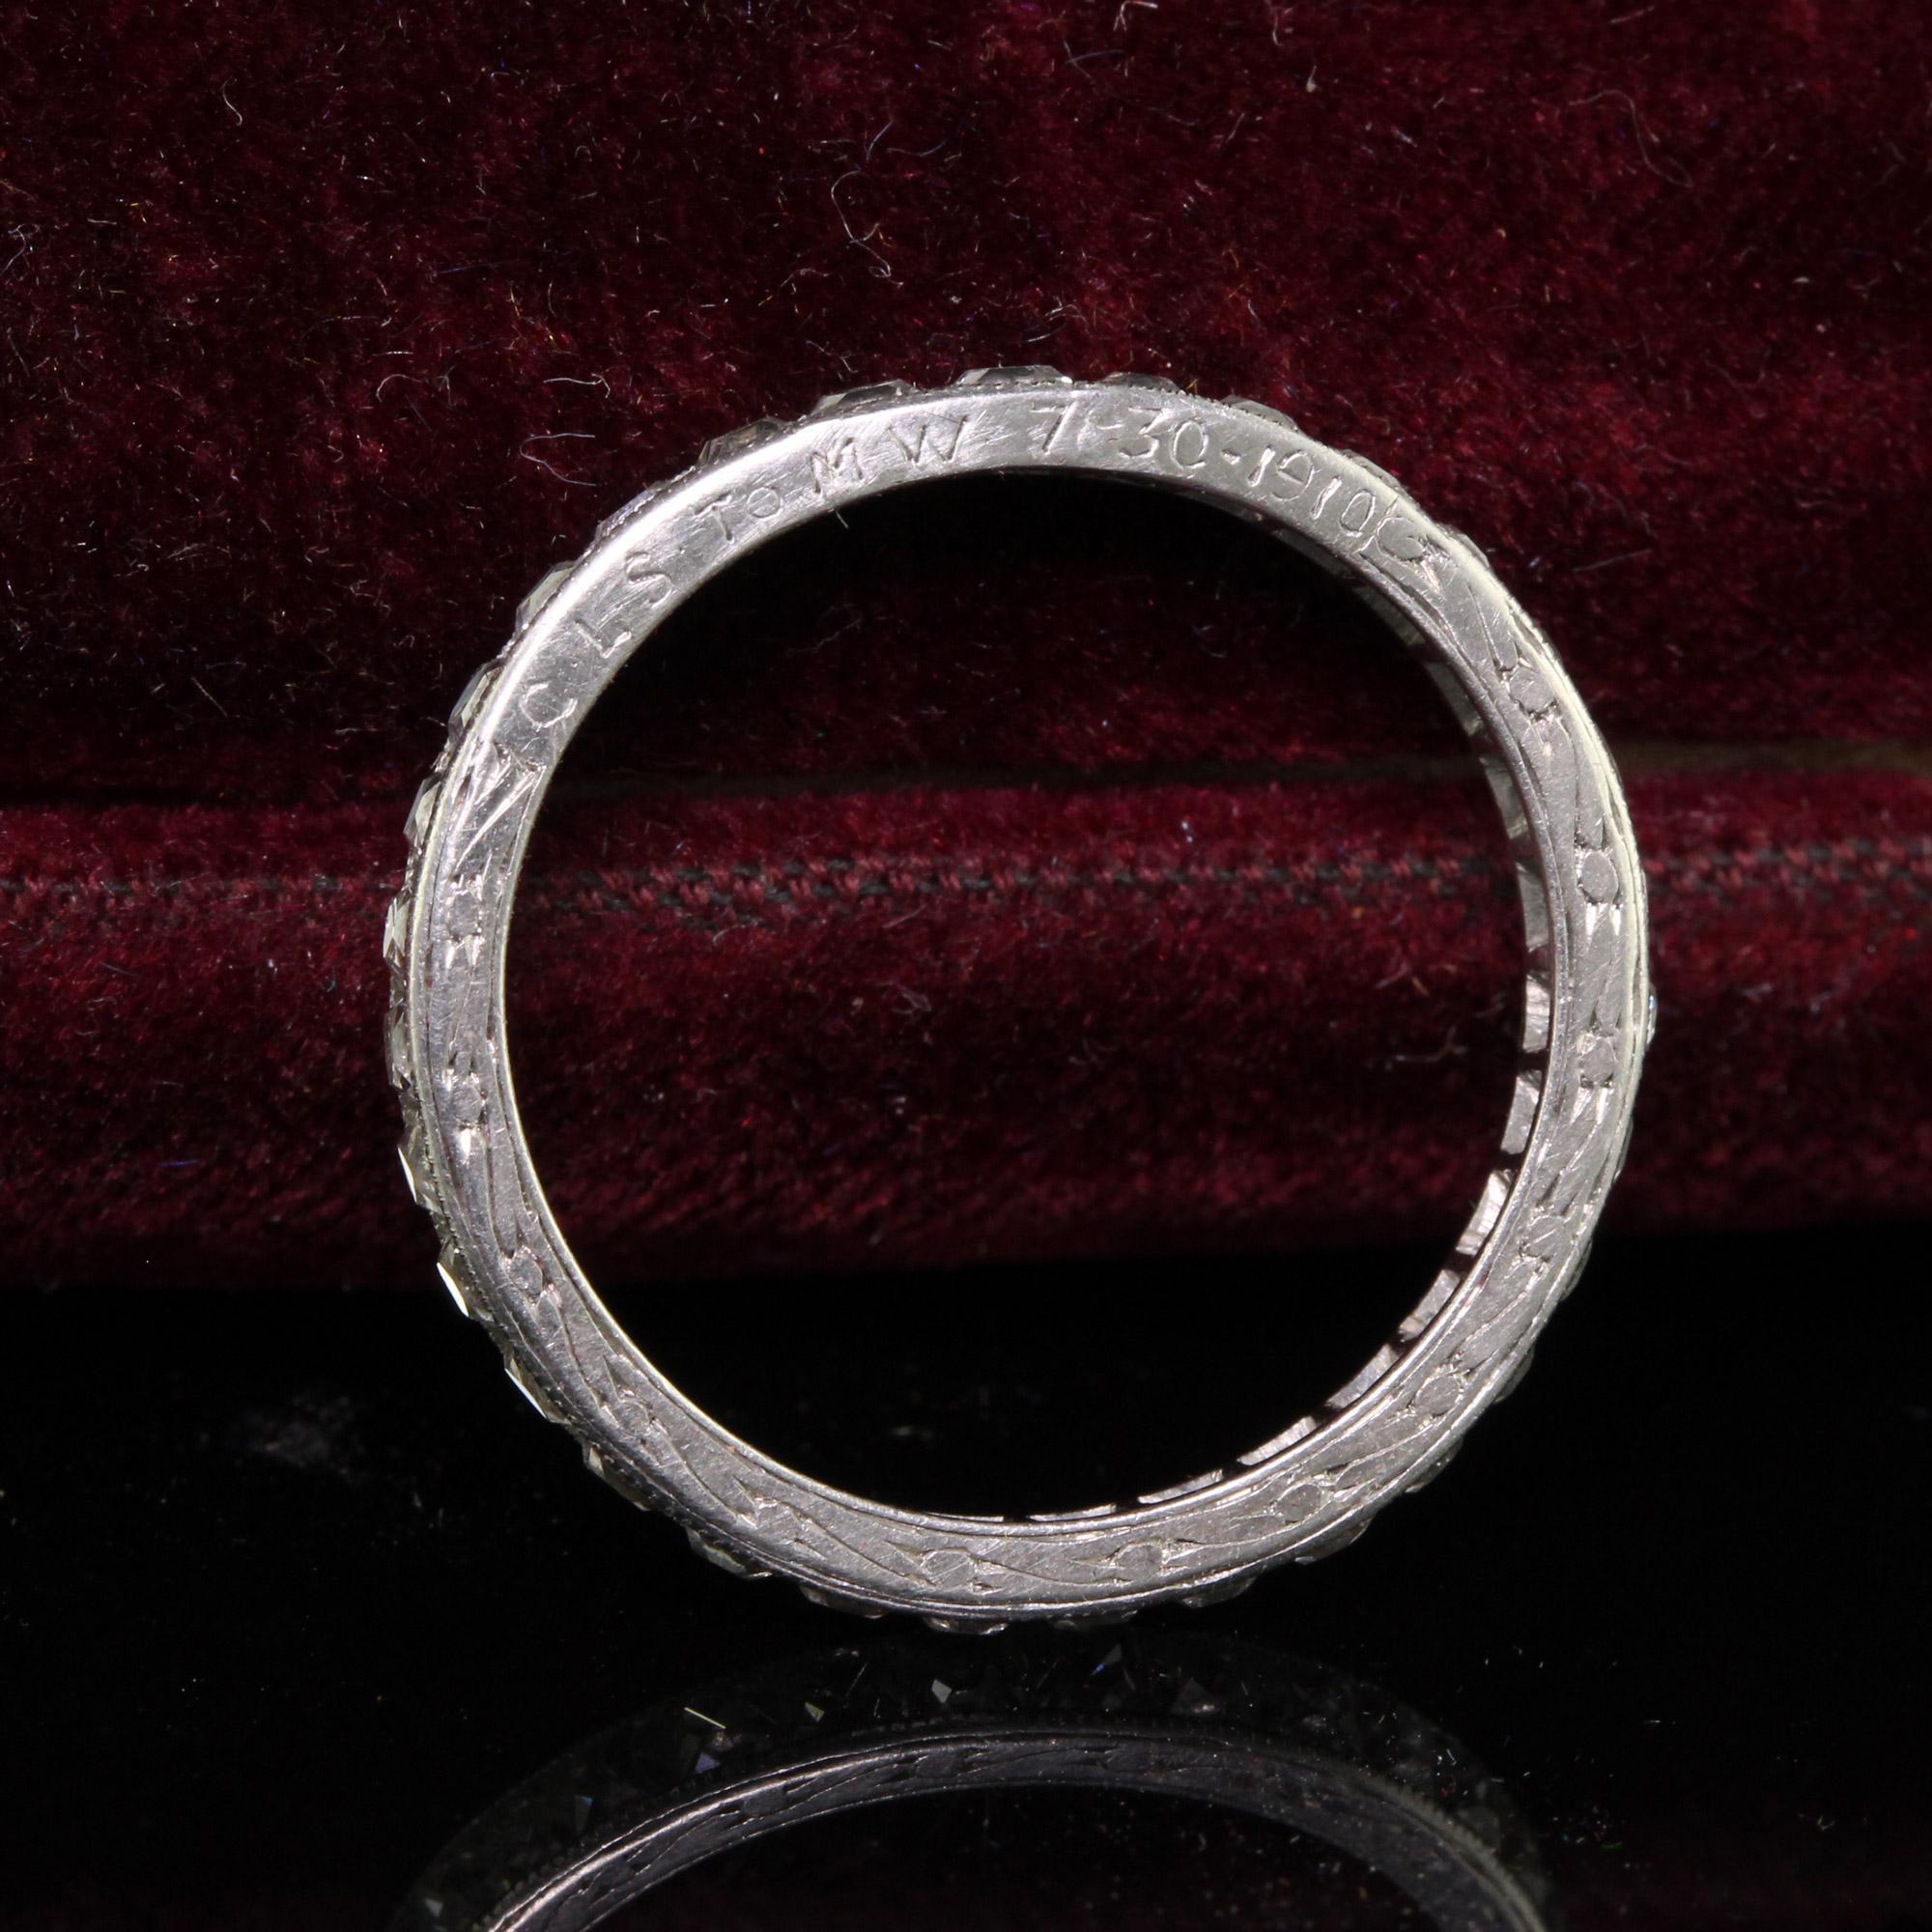 Women's Antique Edwardian Platinum French Cut Diamond Engraved Eternity Ring - Size 7 For Sale